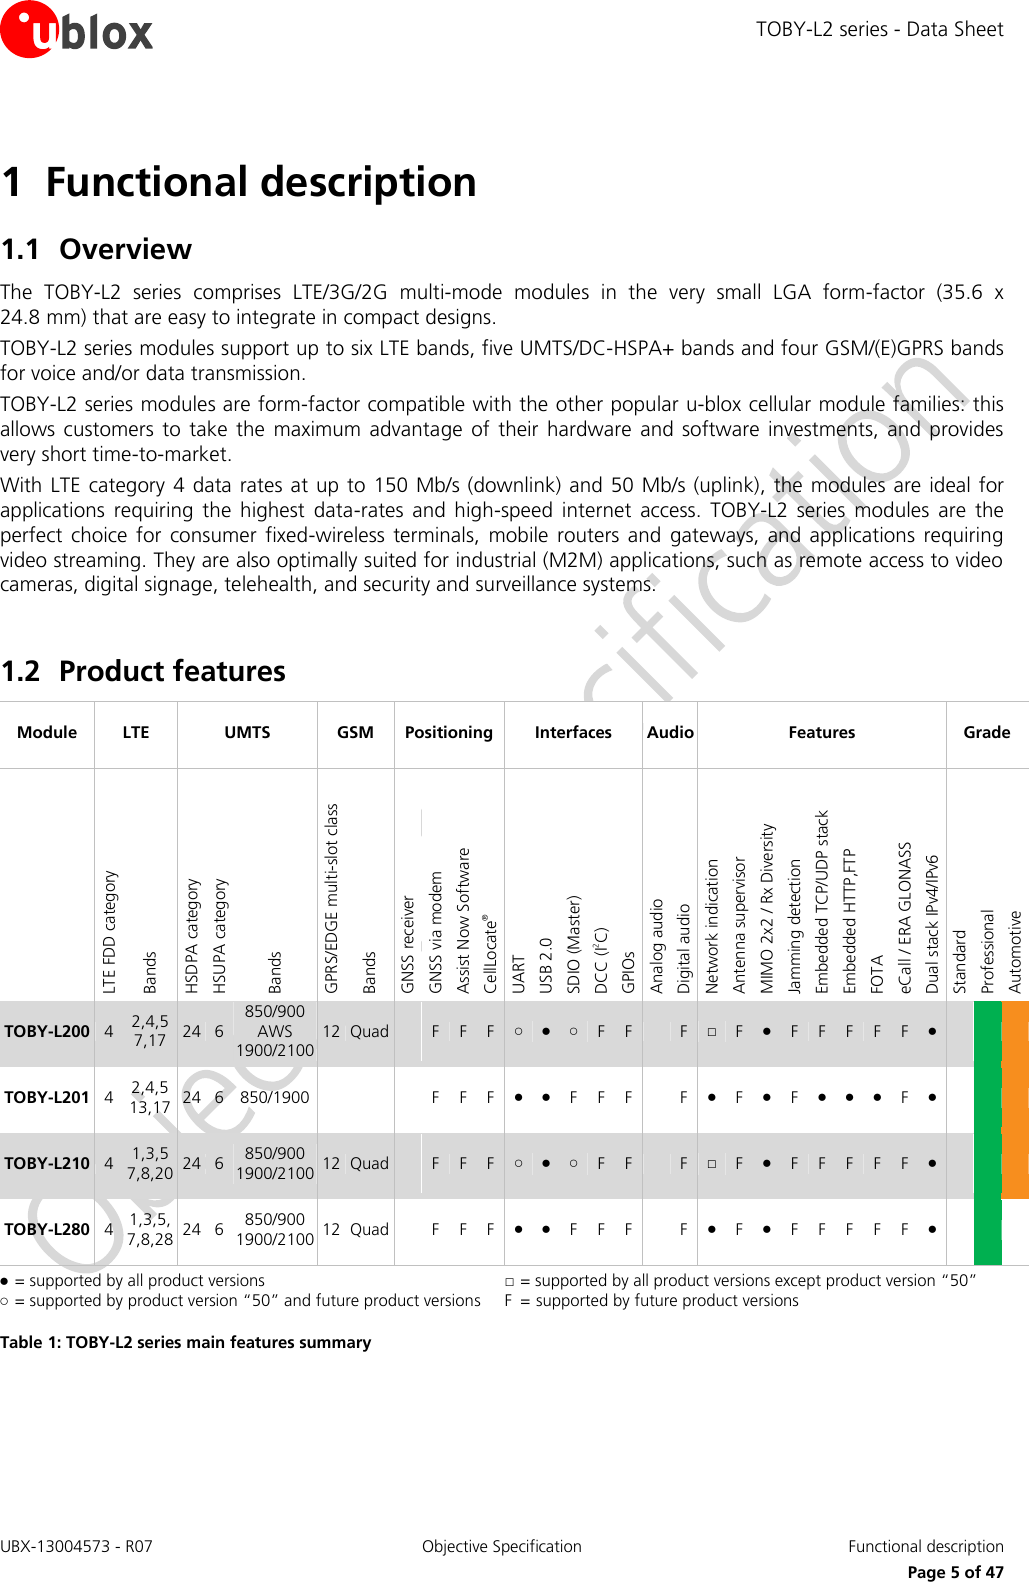 TOBY-L2 series - Data Sheet UBX-13004573 - R07  Objective Specification  Functional description   Page 5 of 47 1 Functional description 1.1 Overview The  TOBY-L2  series  comprises  LTE/3G/2G  multi-mode  modules  in  the  very  small  LGA  form-factor  (35.6  x 24.8 mm) that are easy to integrate in compact designs. TOBY-L2 series modules support up to six LTE bands, five UMTS/DC-HSPA+ bands and four GSM/(E)GPRS bands for voice and/or data transmission. TOBY-L2 series modules are form-factor compatible with the other popular u-blox cellular module families: this allows  customers  to  take  the  maximum  advantage  of  their  hardware  and  software  investments,  and  provides very short time-to-market. With LTE  category  4 data rates  at up to  150 Mb/s (downlink)  and 50 Mb/s (uplink), the  modules are ideal for applications  requiring  the  highest  data-rates  and  high-speed  internet  access.  TOBY-L2  series  modules  are  the perfect  choice  for  consumer  fixed-wireless  terminals,  mobile  routers  and  gateways,  and  applications  requiring video streaming. They are also optimally suited for industrial (M2M) applications, such as remote access to video cameras, digital signage, telehealth, and security and surveillance systems.  1.2 Product features Module LTE UMTS GSM Positioning Interfaces Audio Features Grade  LTE FDD category Bands HSDPA category HSUPA category Bands GPRS/EDGE multi-slot class Bands GNSS receiver GNSS via modem Assist Now Software CellLocate® UART USB 2.0 SDIO (Master) DCC (I2C) GPIOs Analog audio Digital audio  Network indication Antenna supervisor MIMO 2x2 / Rx Diversity Jamming detection Embedded TCP/UDP stack Embedded HTTP,FTP FOTA eCall / ERA GLONASS Dual stack IPv4/IPv6 Standard Professional Automotive TOBY-L200 4 2,4,5 7,17 24 6 850/900 AWS 1900/2100 12 Quad  F F F ○ ● ○ F F  F □ F ● F F F F F ●    TOBY-L201 4 2,4,5 13,17  24 6 850/1900    F F F ● ● F F F  F ● F ● F ● ● ● F ●    TOBY-L210 4 1,3,5 7,8,20 24 6 850/900 1900/2100 12 Quad  F F F ○ ● ○ F F  F □ F ● F F F F F ●    TOBY-L280 4 1,3,5, 7,8,28 24 6 850/900 1900/2100 12 Quad  F F F ● ● F F F  F ● F ● F F F F F ●    ●  = supported by all product versions  ○  = supported by product version “50” and future product versions □  = supported by all product versions except product version “50”  F  =  supported by future product versions Table 1: TOBY-L2 series main features summary  